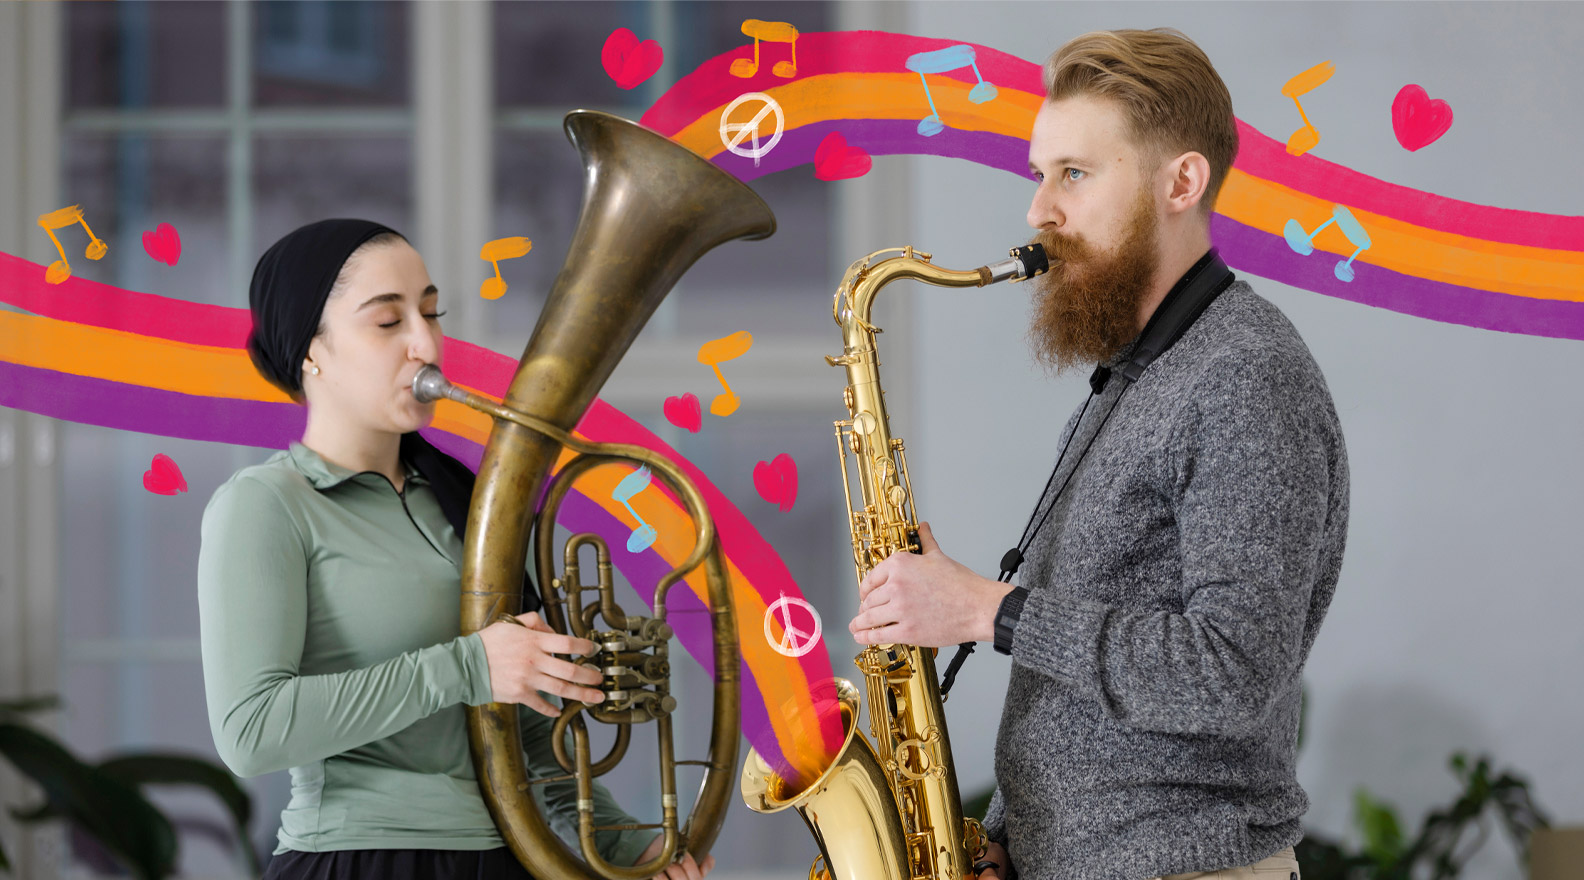 A man and a woman play wind instruments. Various visual elements originating from musical instruments have been added to the image in the form of illustrations.